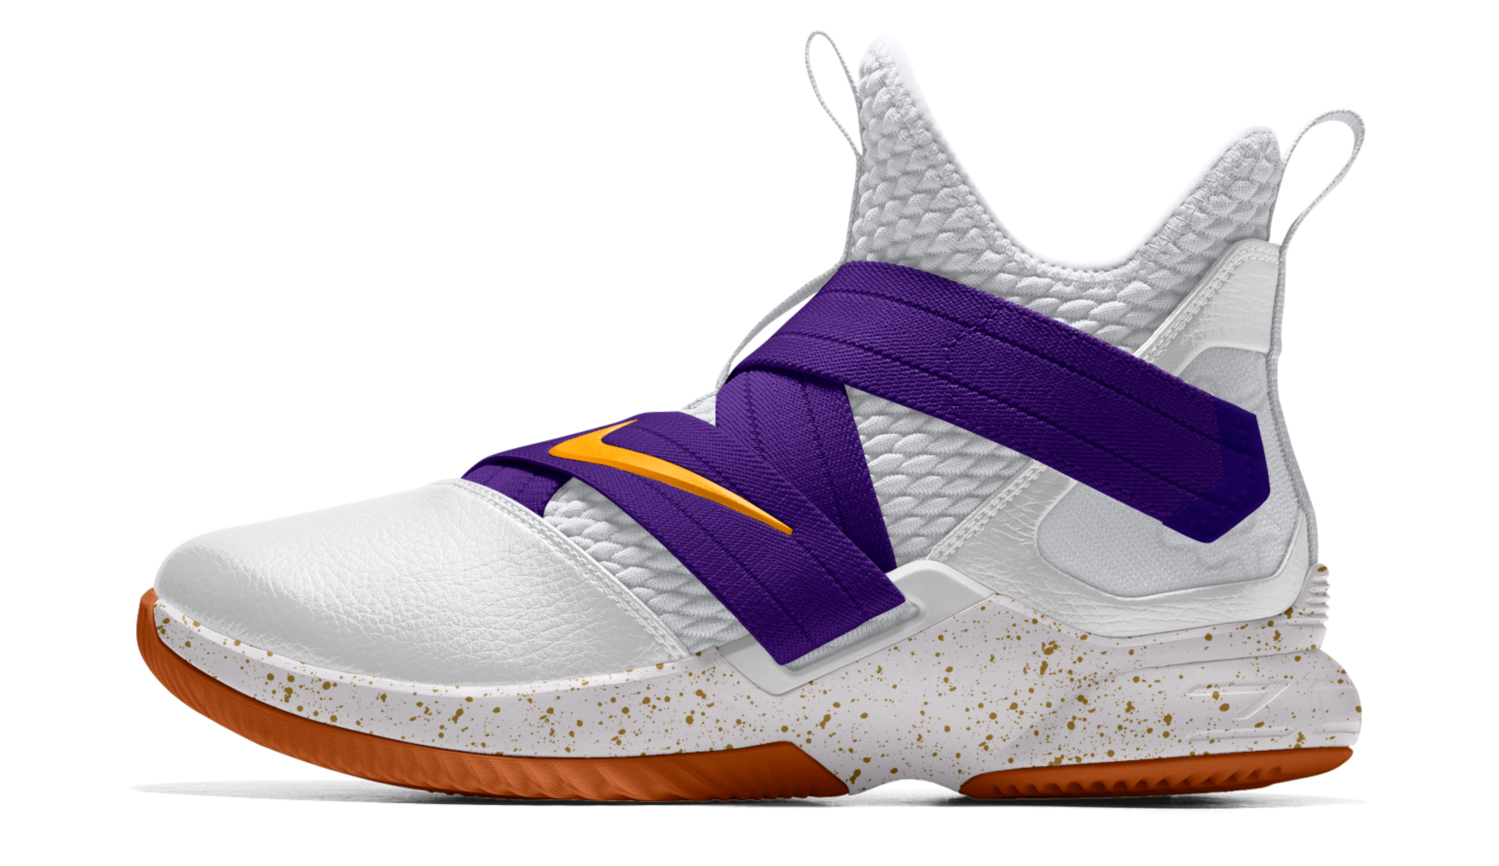 lebron lakers edition shoes